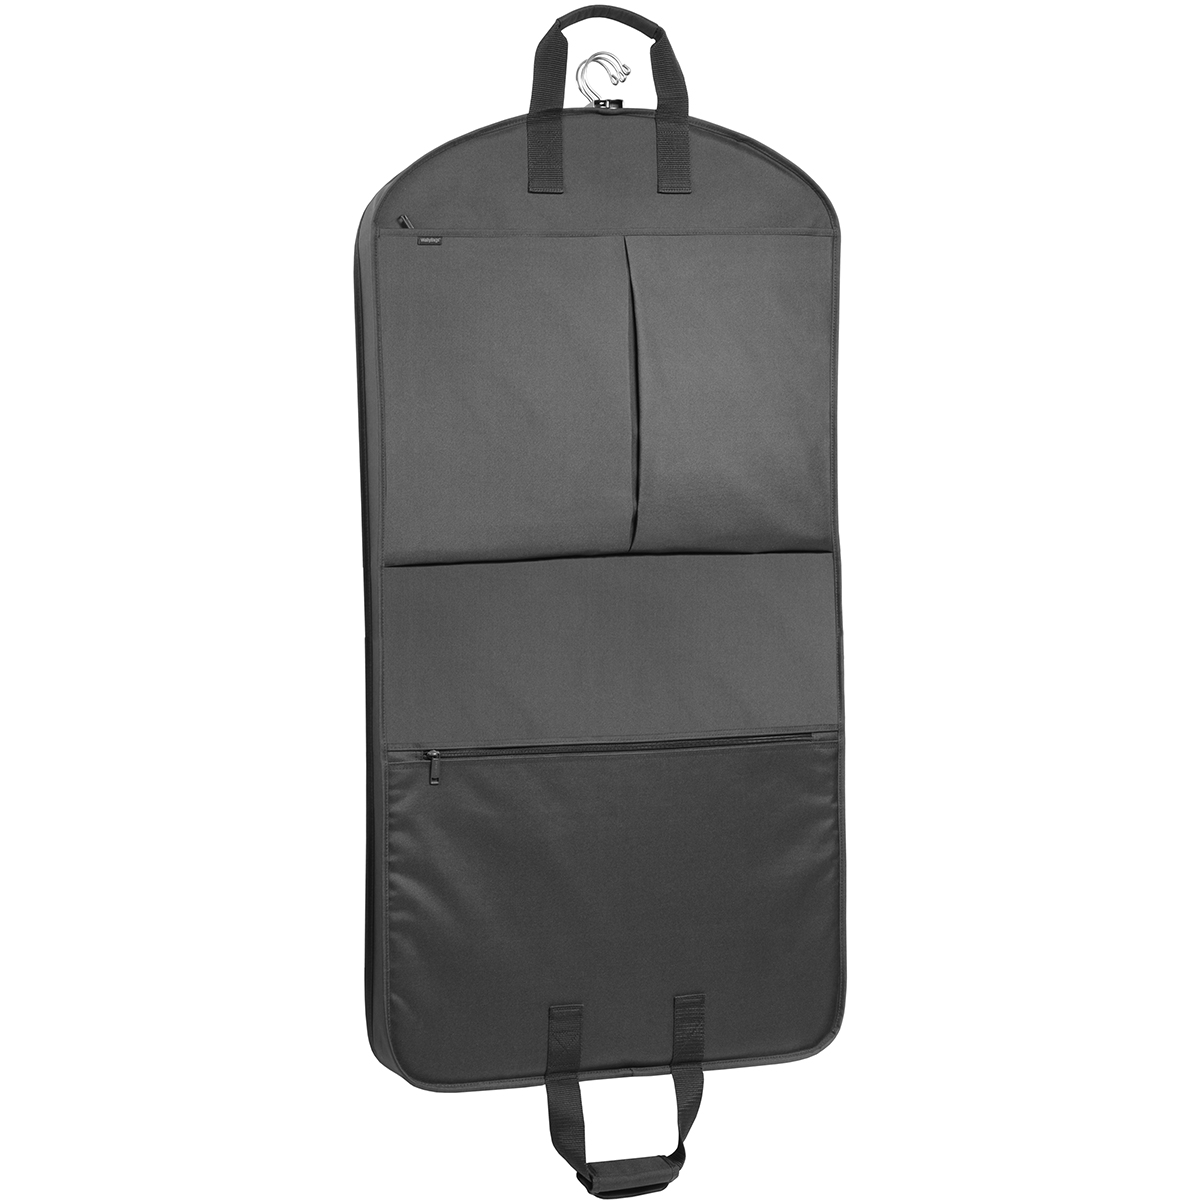 WallyBags(R) 45in. Extra Capacity Travel Garment Bag